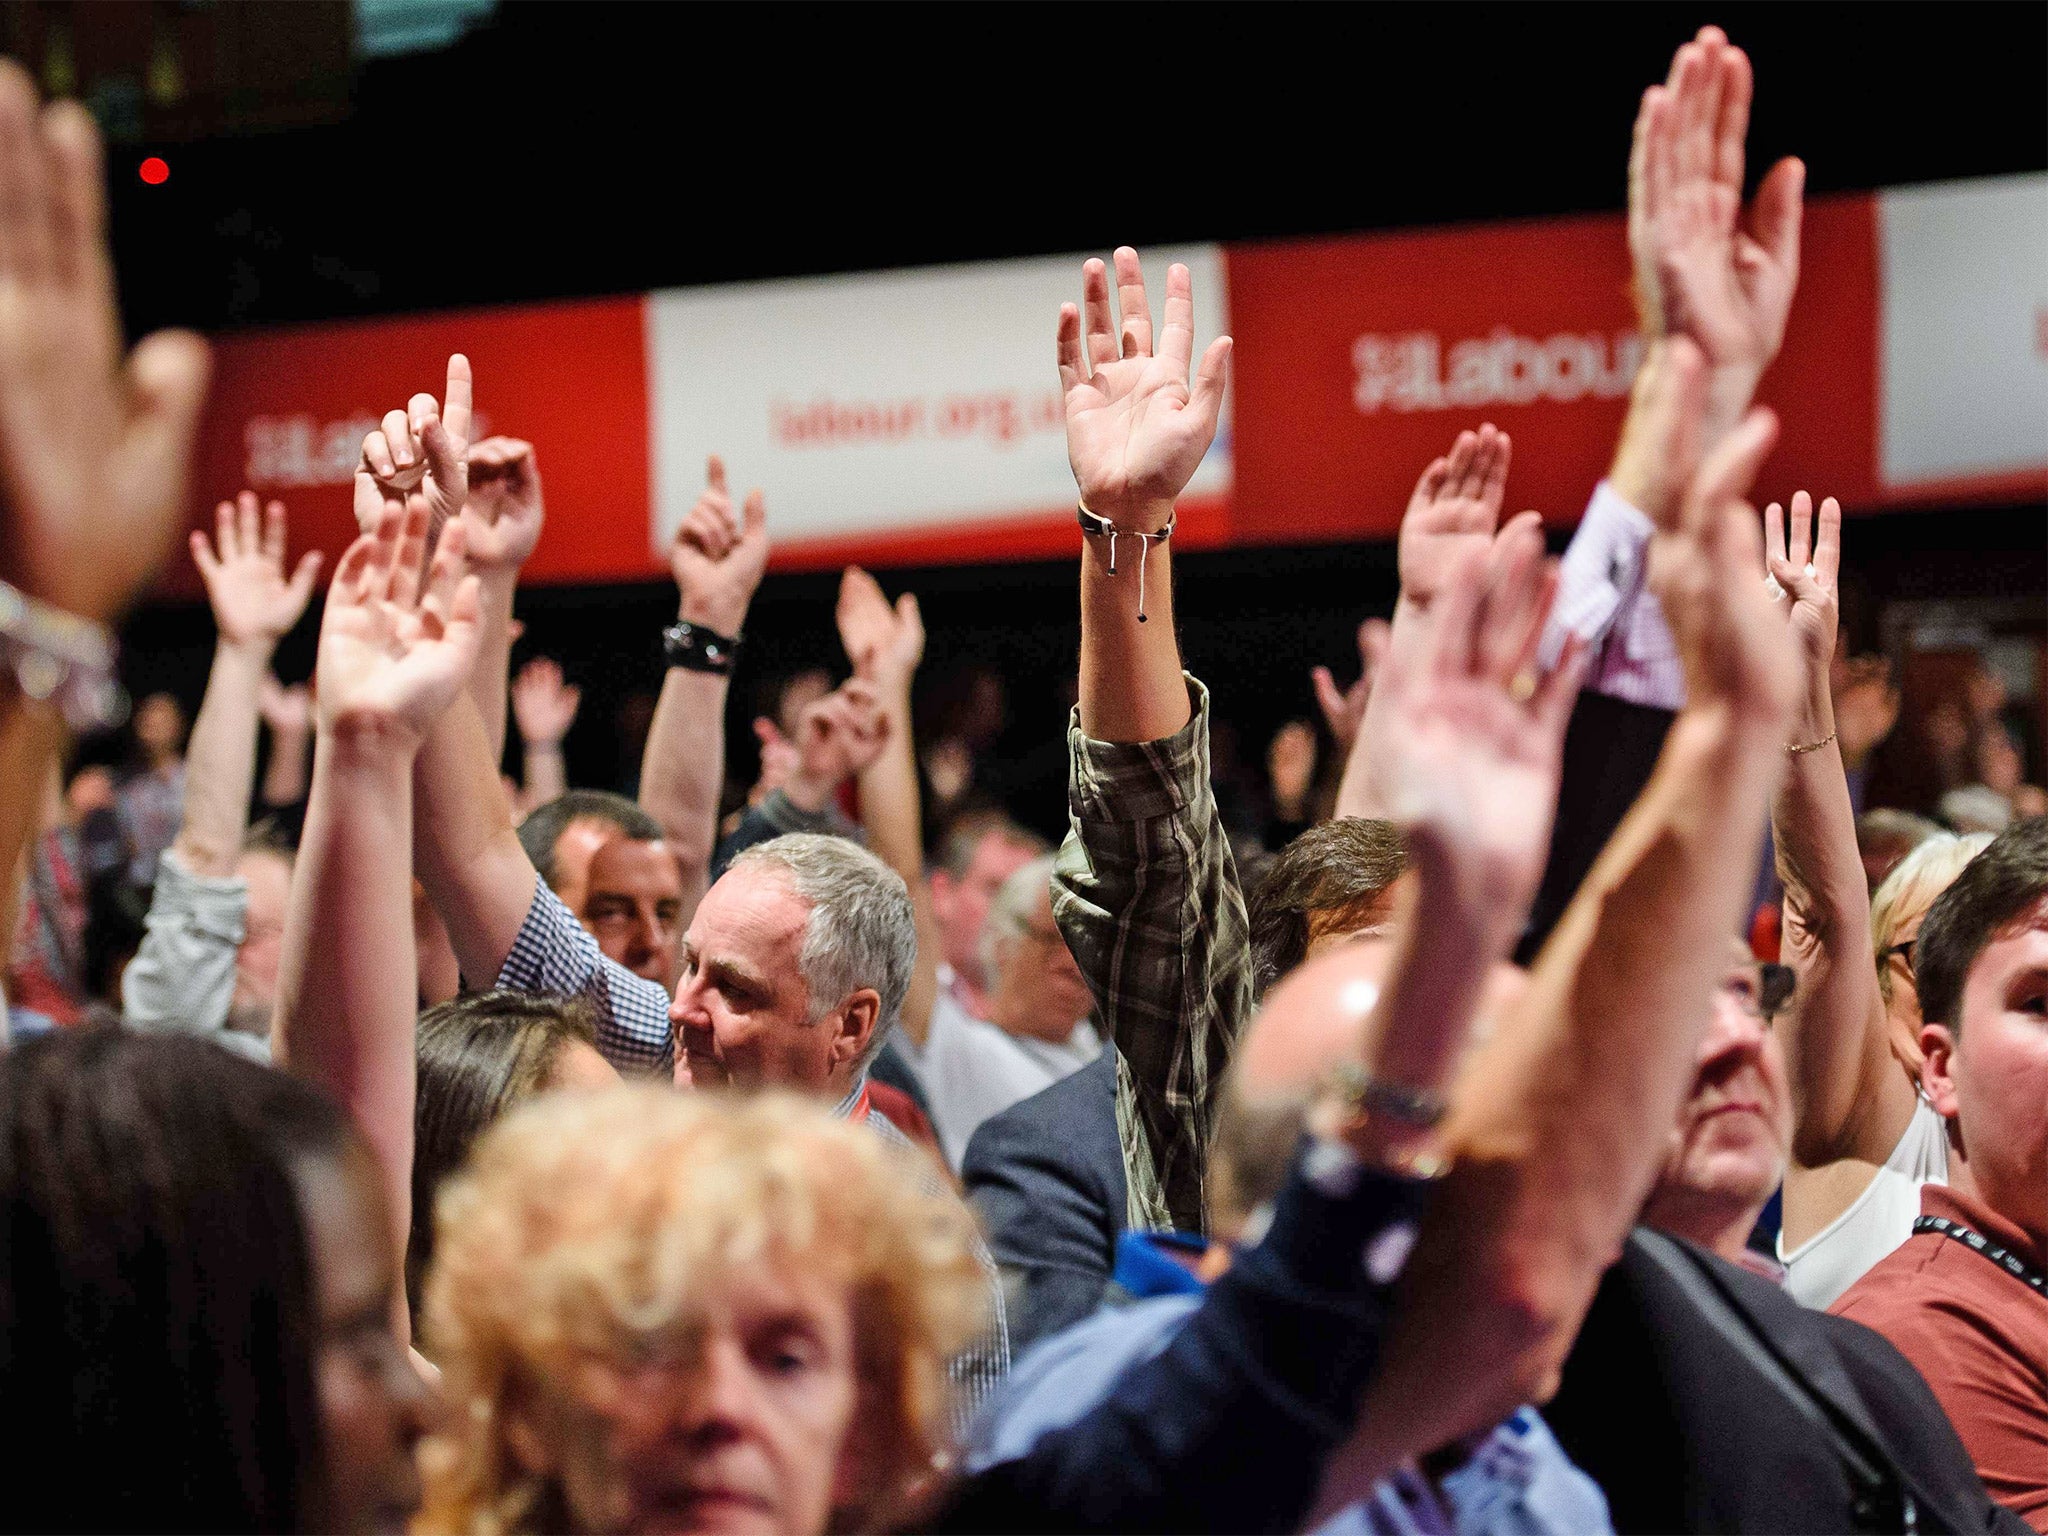 Labour delegates take part in a vote on the conditions for supporting British military action in Syria (Getty)